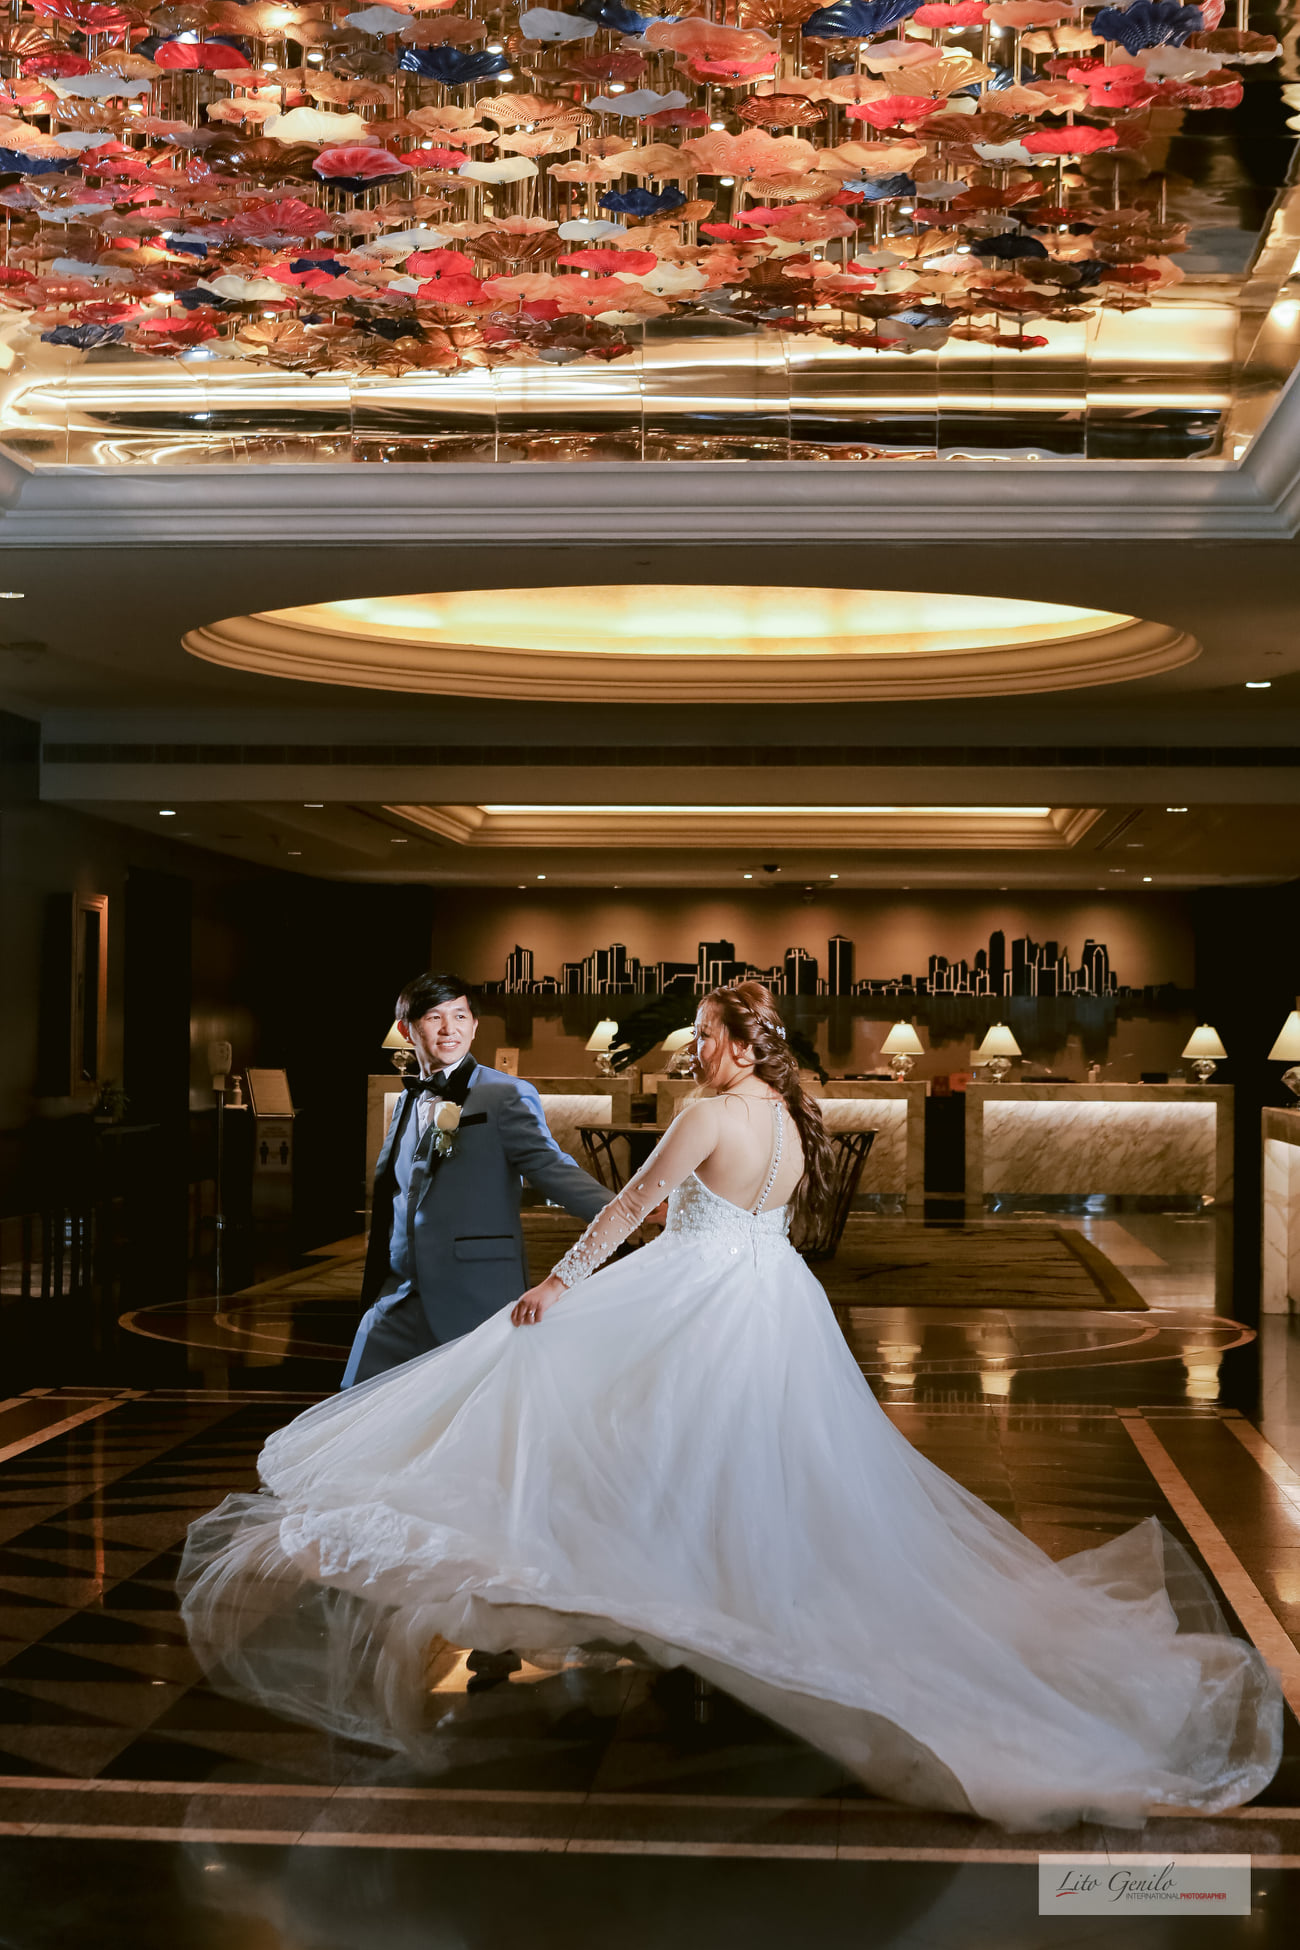 Patrick and Eunice Intimate Wedding in Manila. Captured by Smart Shot Studio.